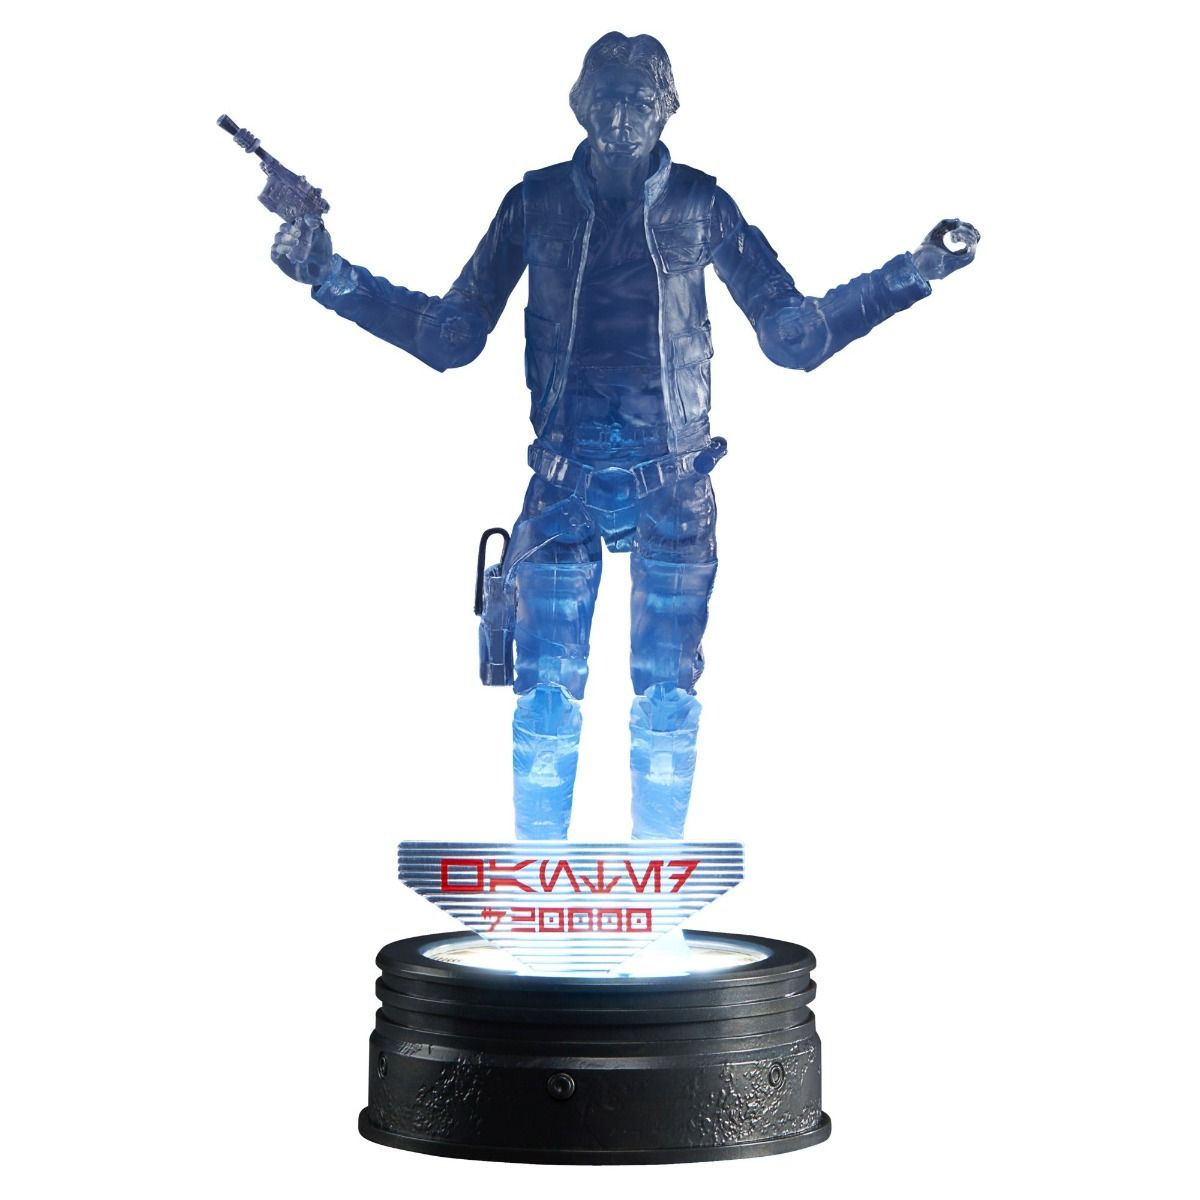 Star Wars TBS Holocomm Colleciton Han Solo 6-Inch Action Figure画像